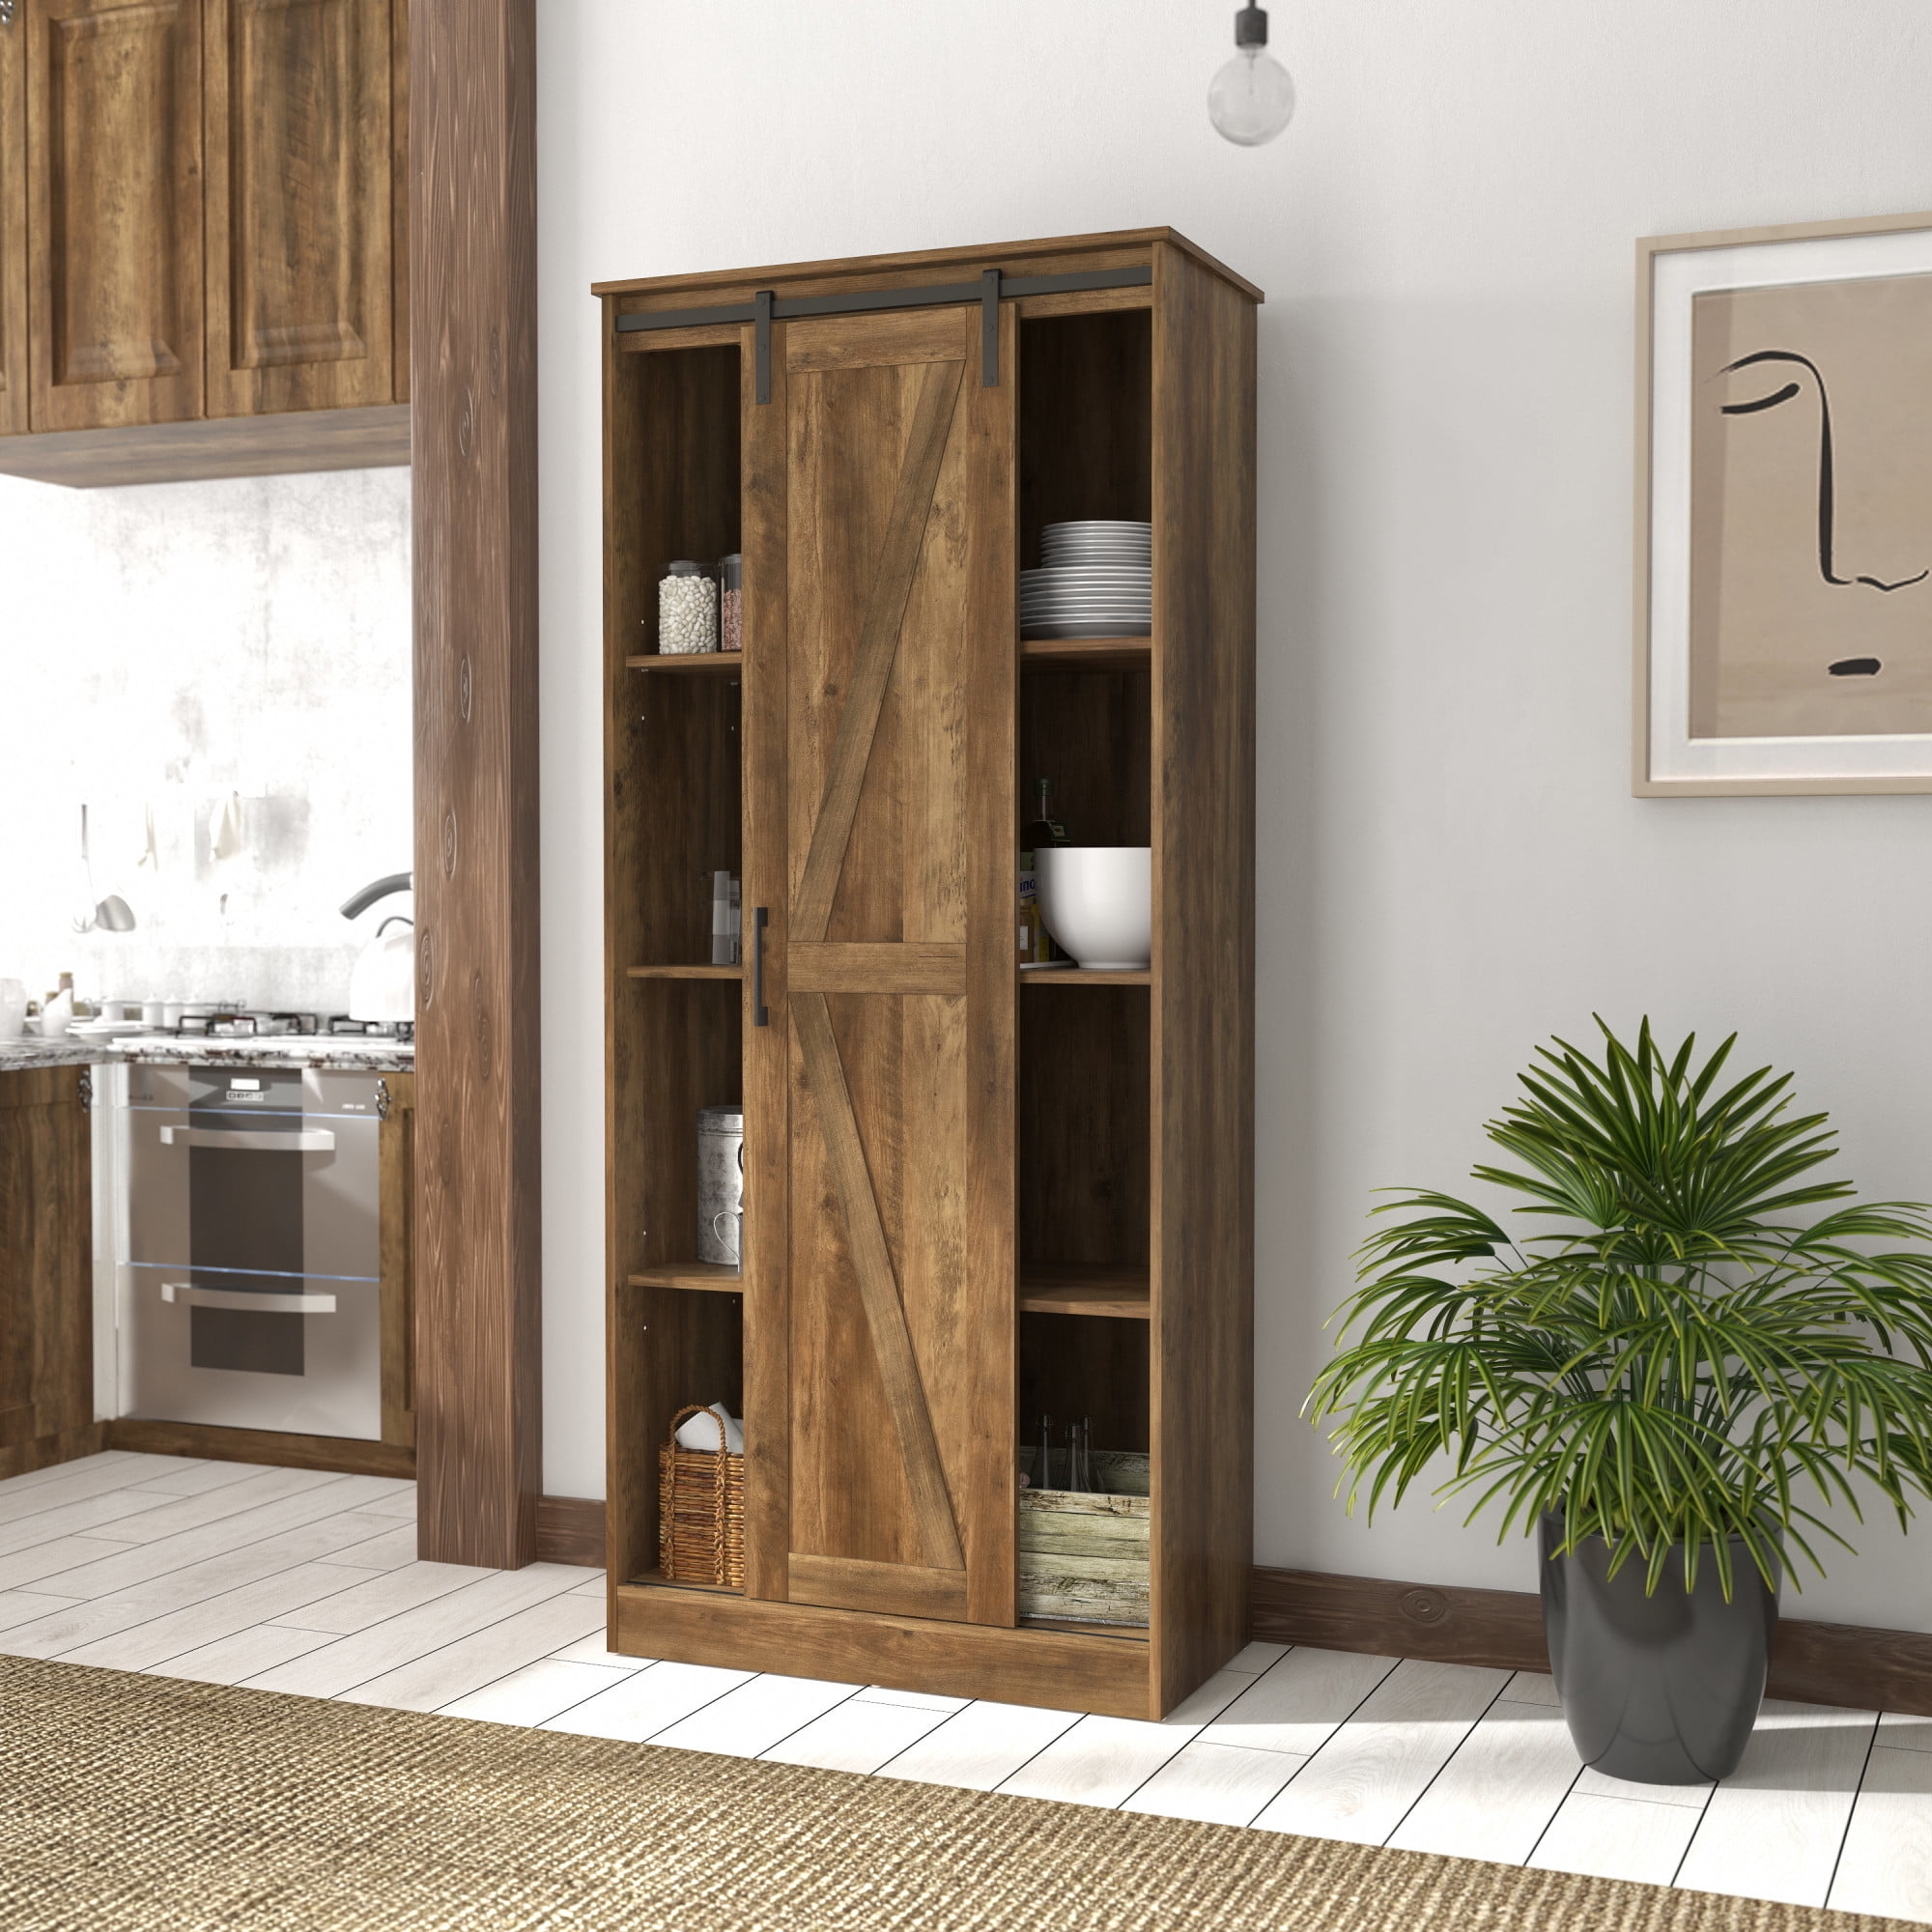 A wooden pantry